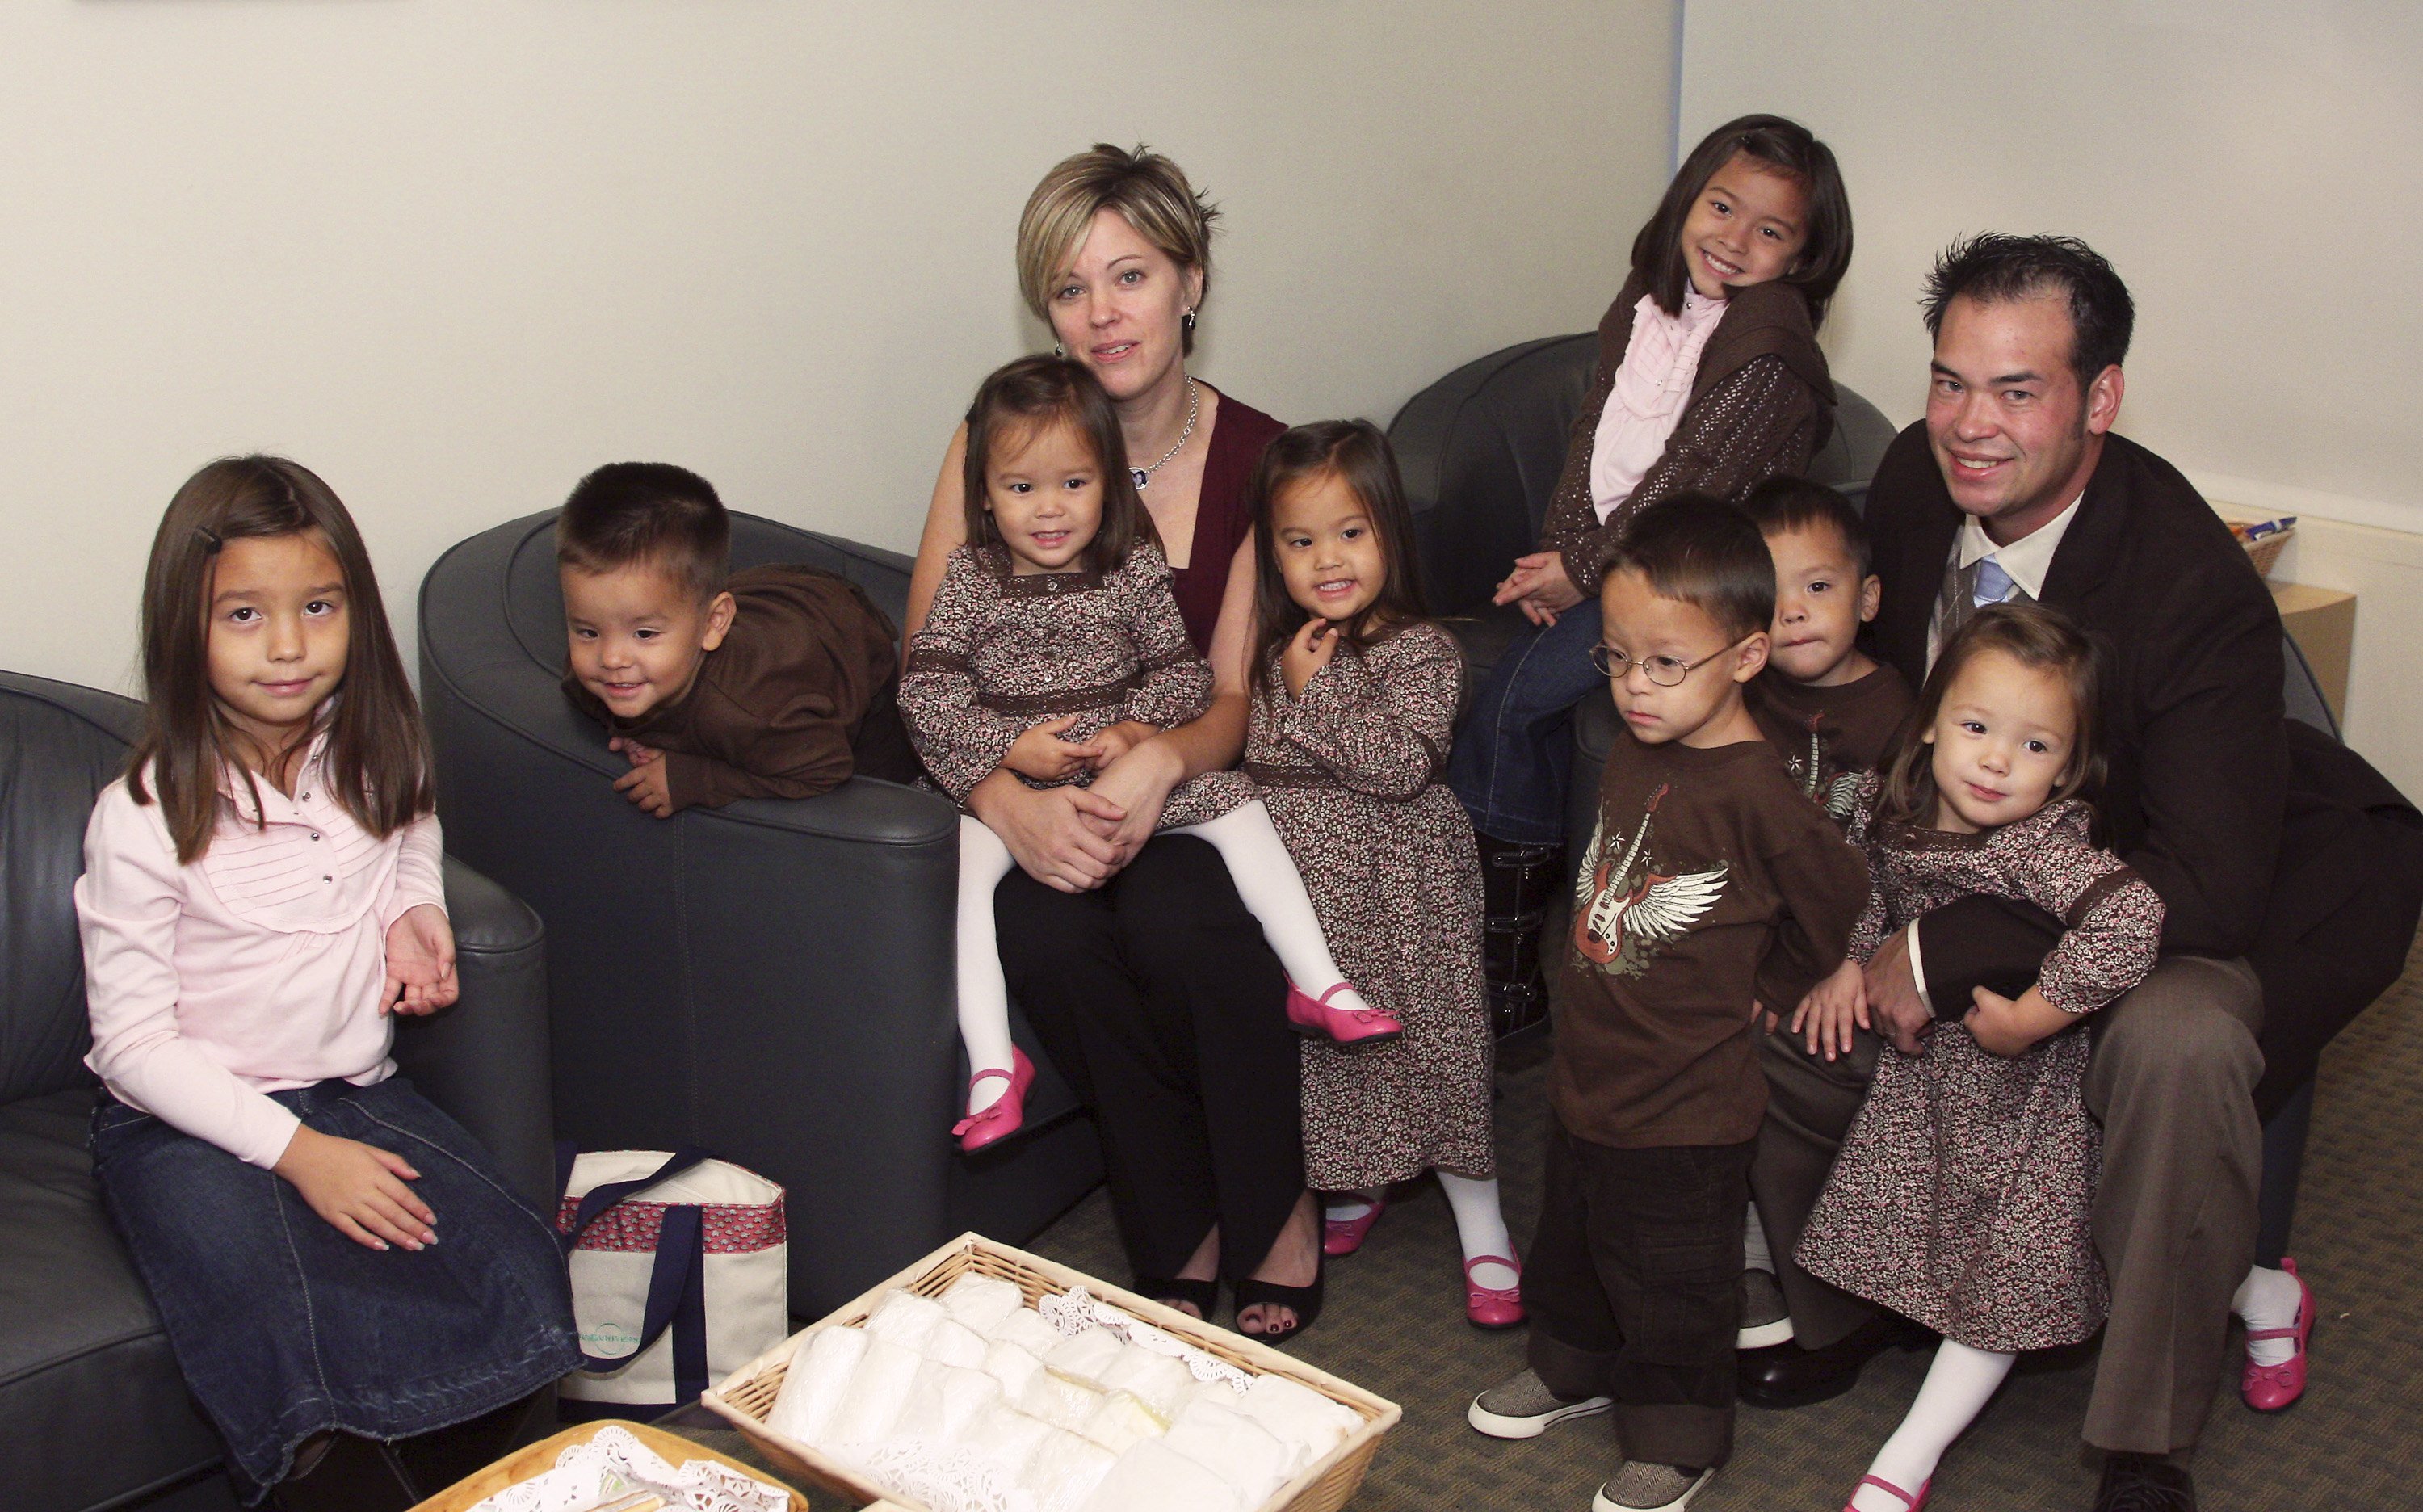 Kate Gosselin and John Gosselin talk about their twin daughters and sextuplets on NBC News' "Today" on October 2, 2007. | Source: Getty Images